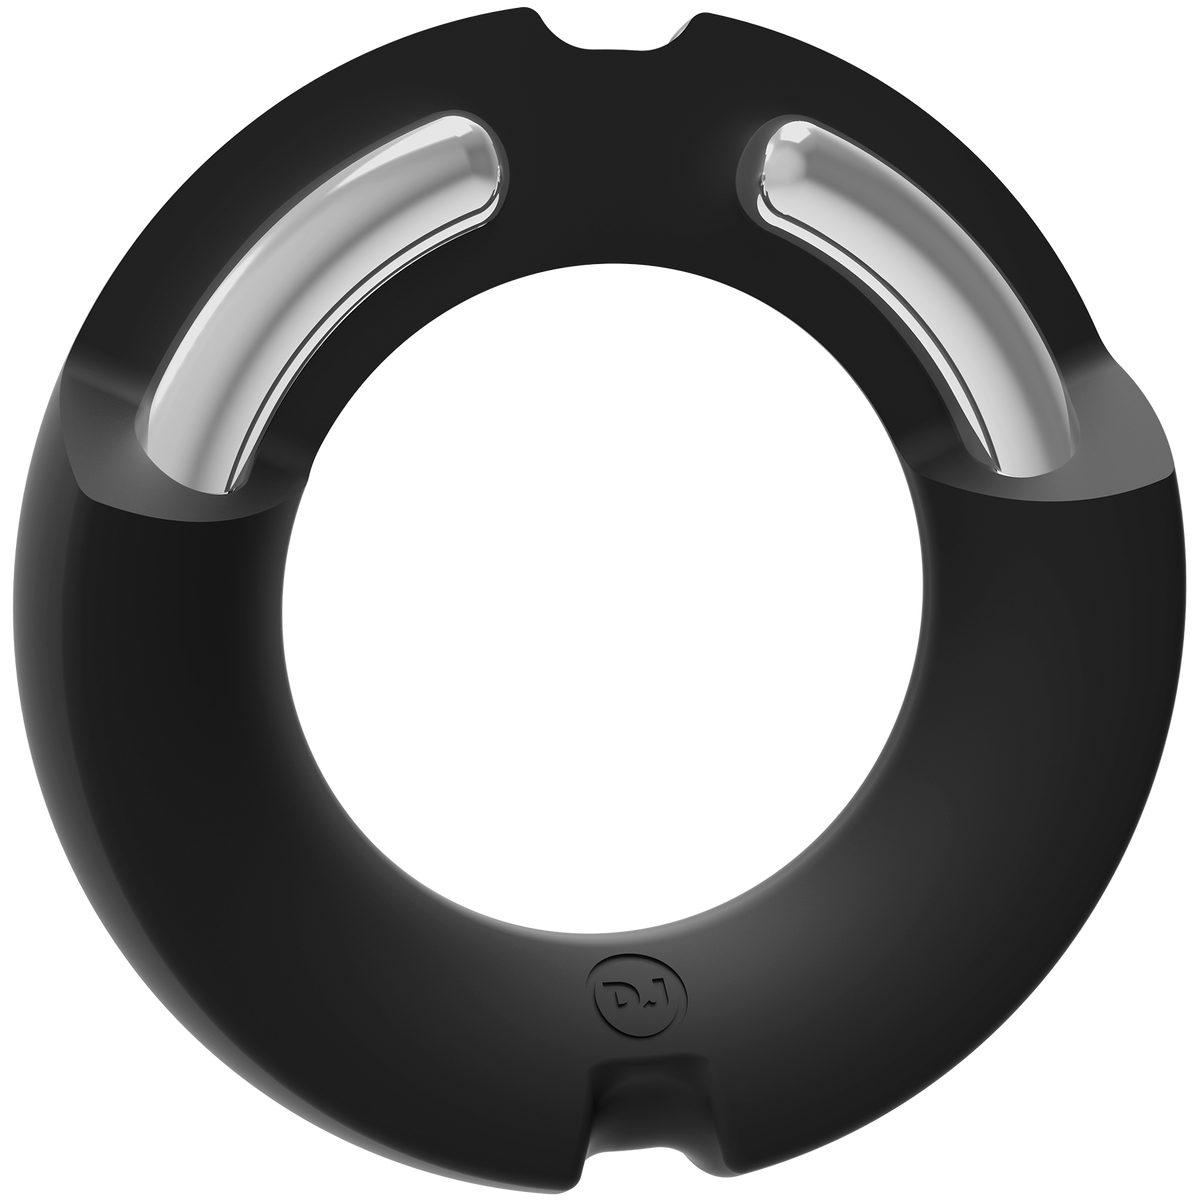 Doc Johnson KINK Silicone-Covered Metal Cock Ring - 50mm